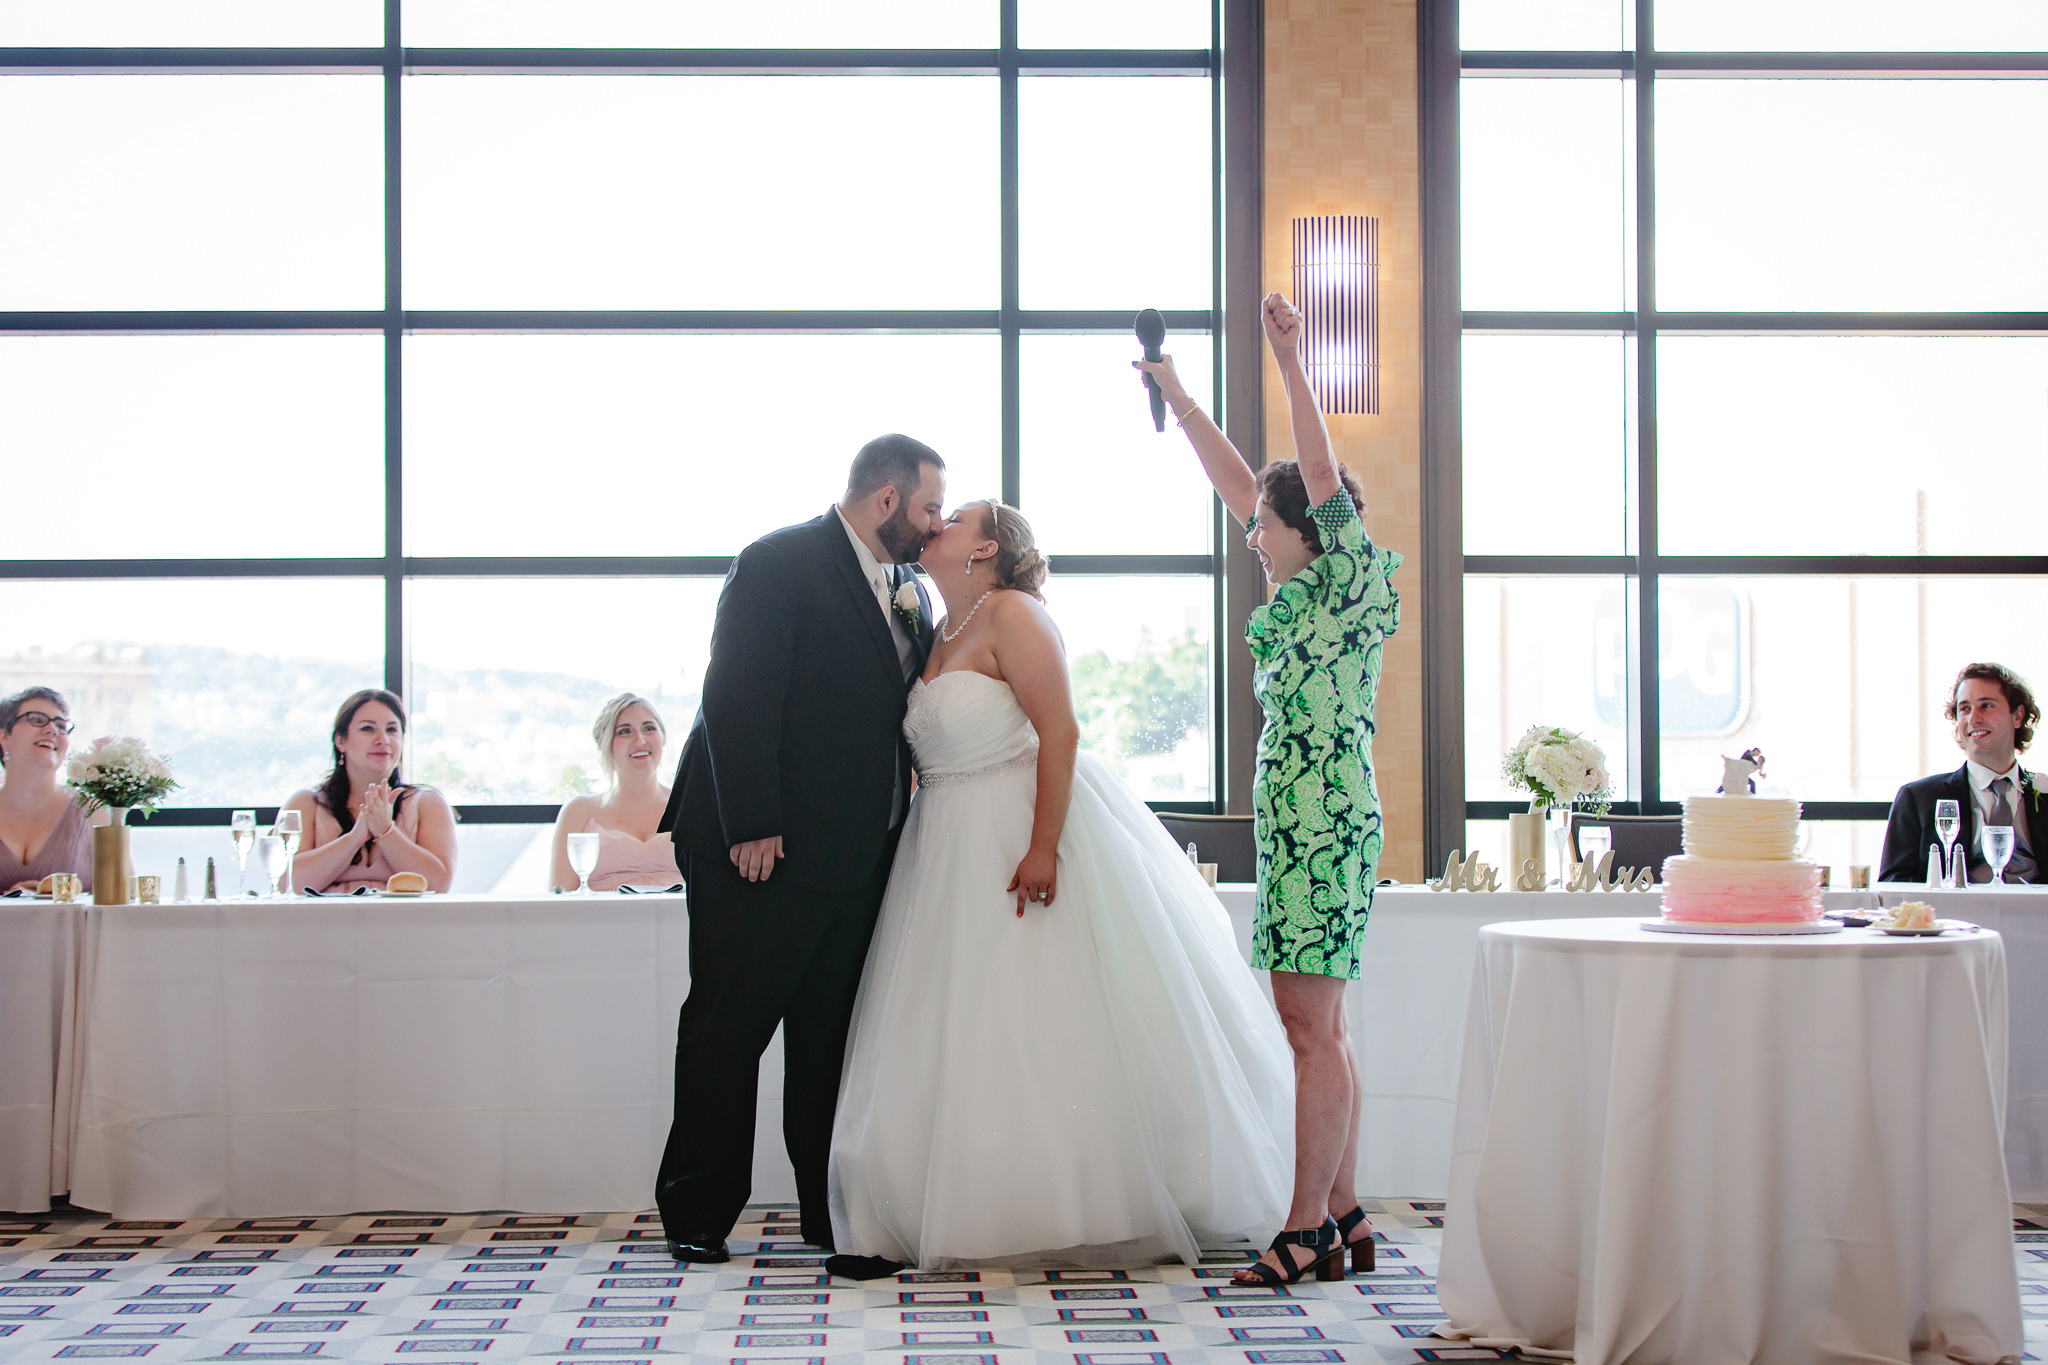 Newlyweds kiss after breaking the glass at Duquesne University